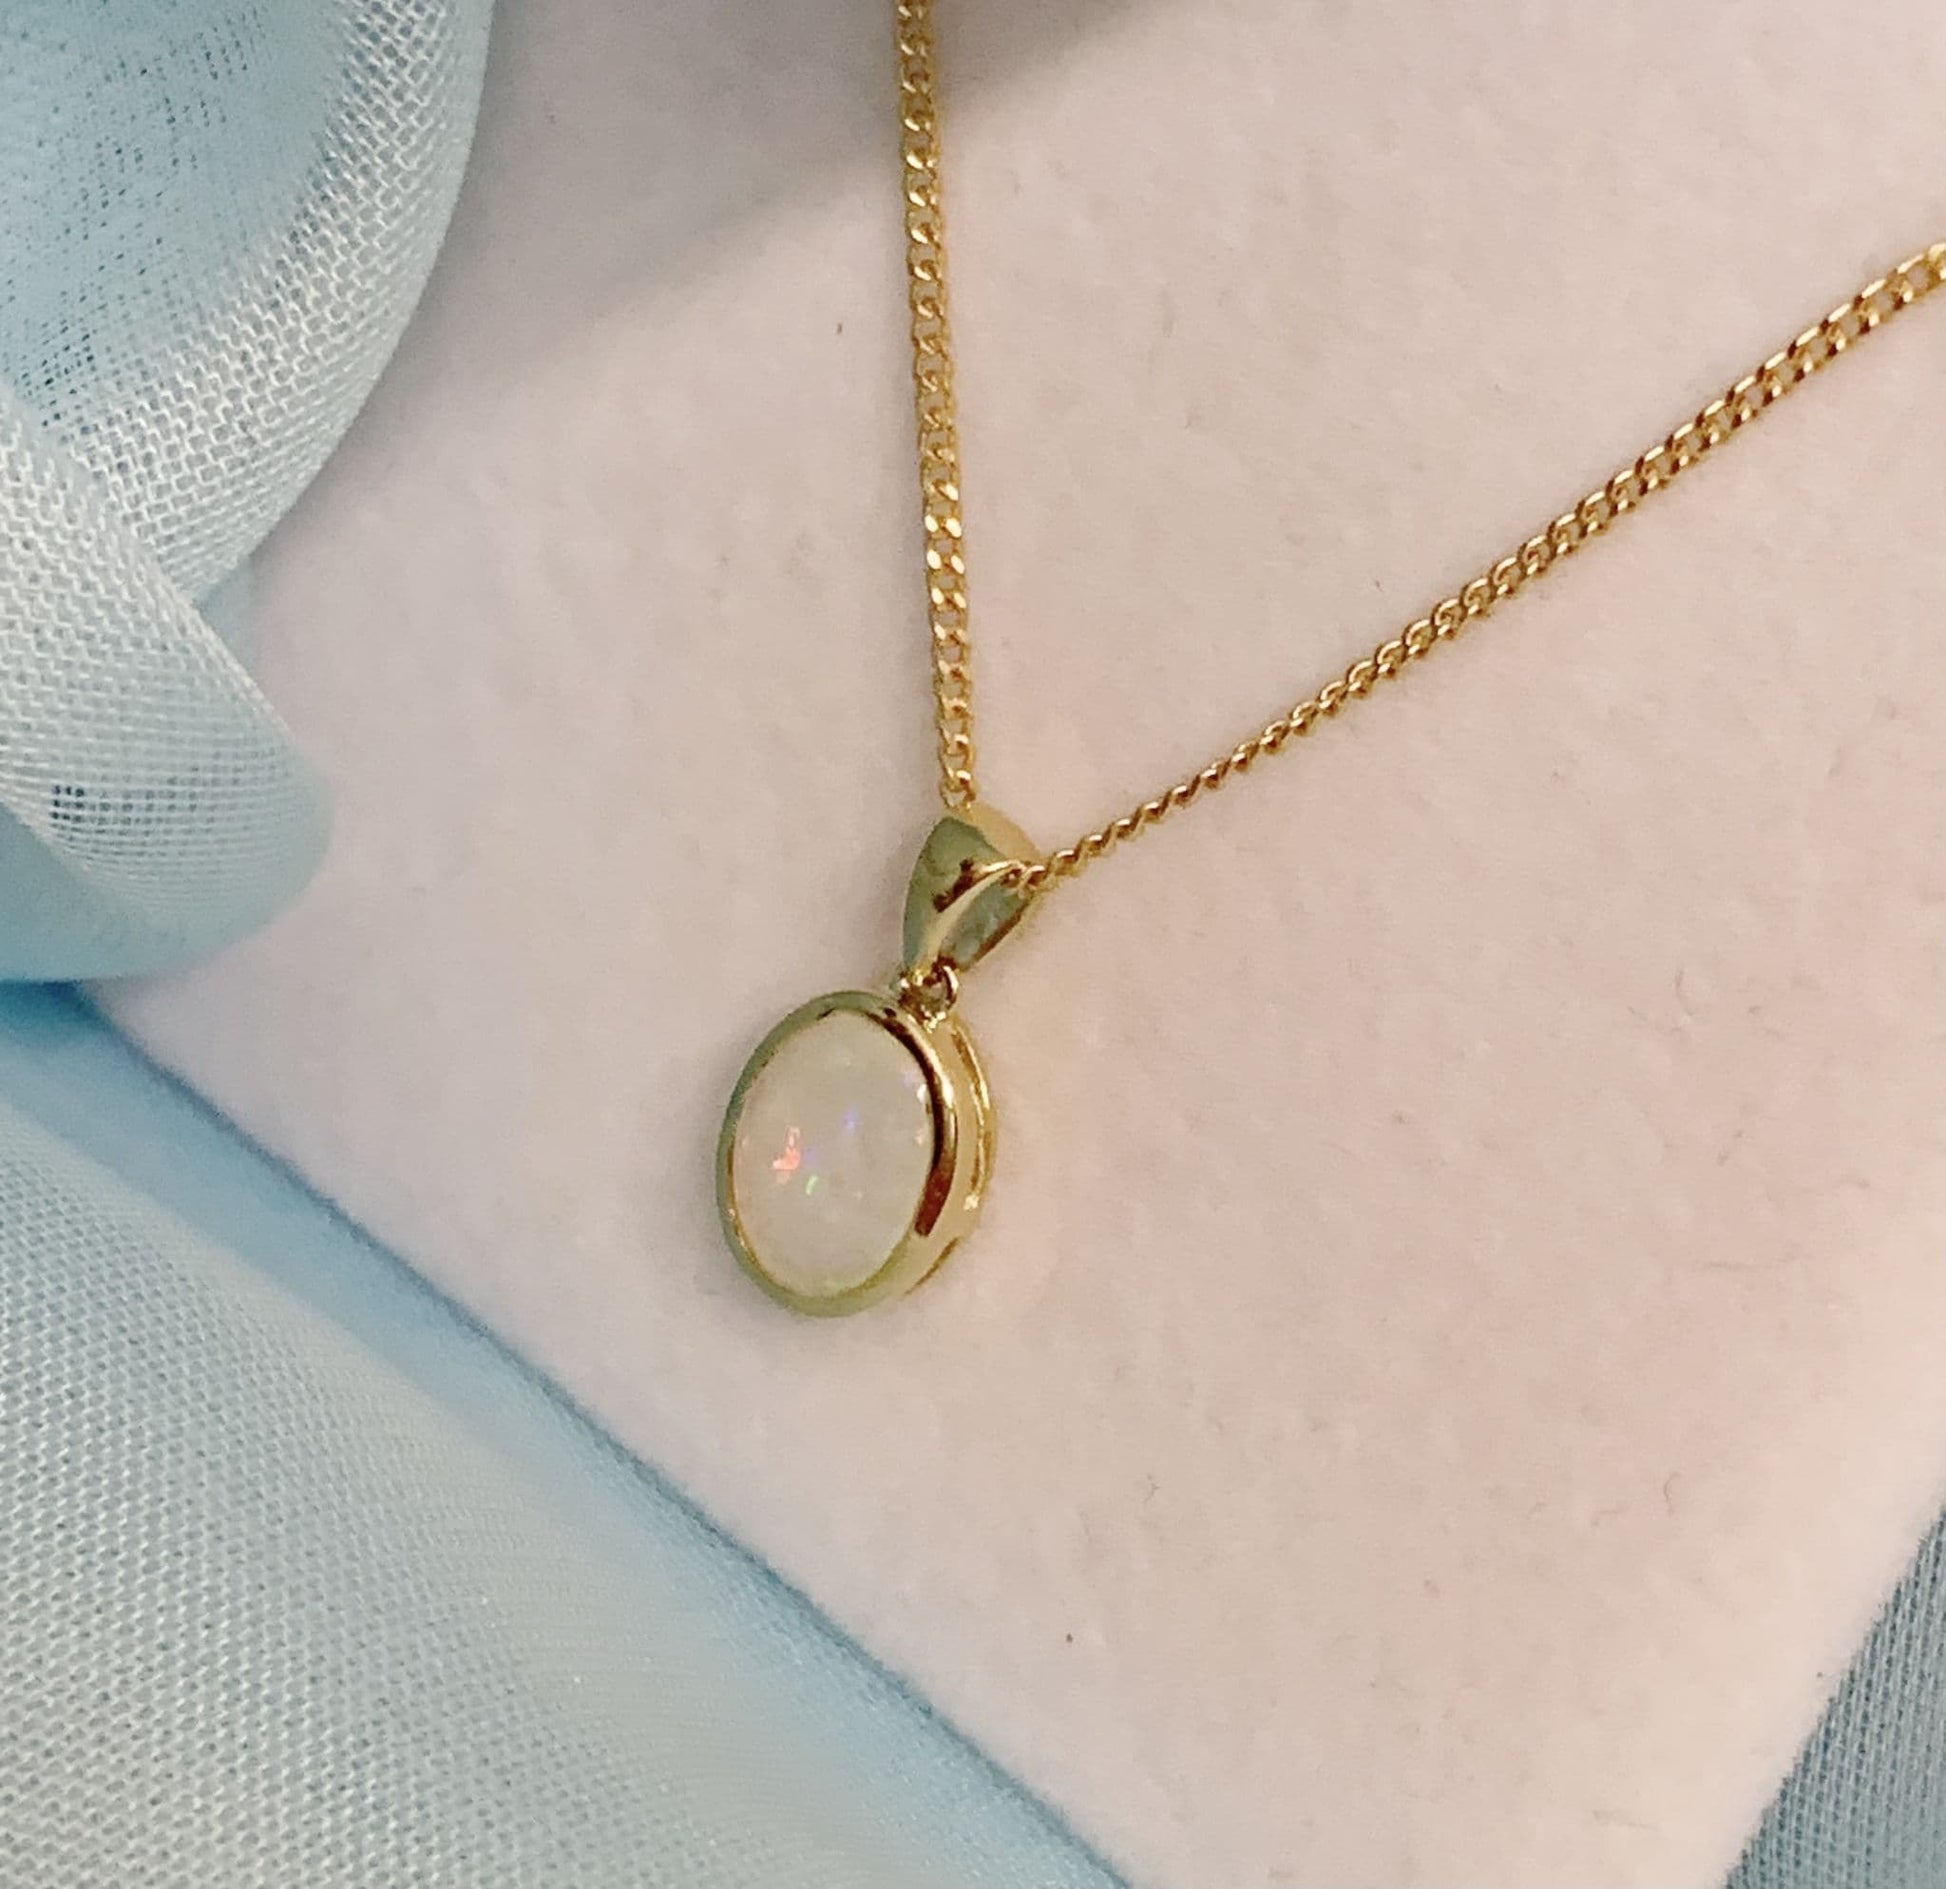 Real opal necklace yellow gold oval pendant smooth rubbed over setting